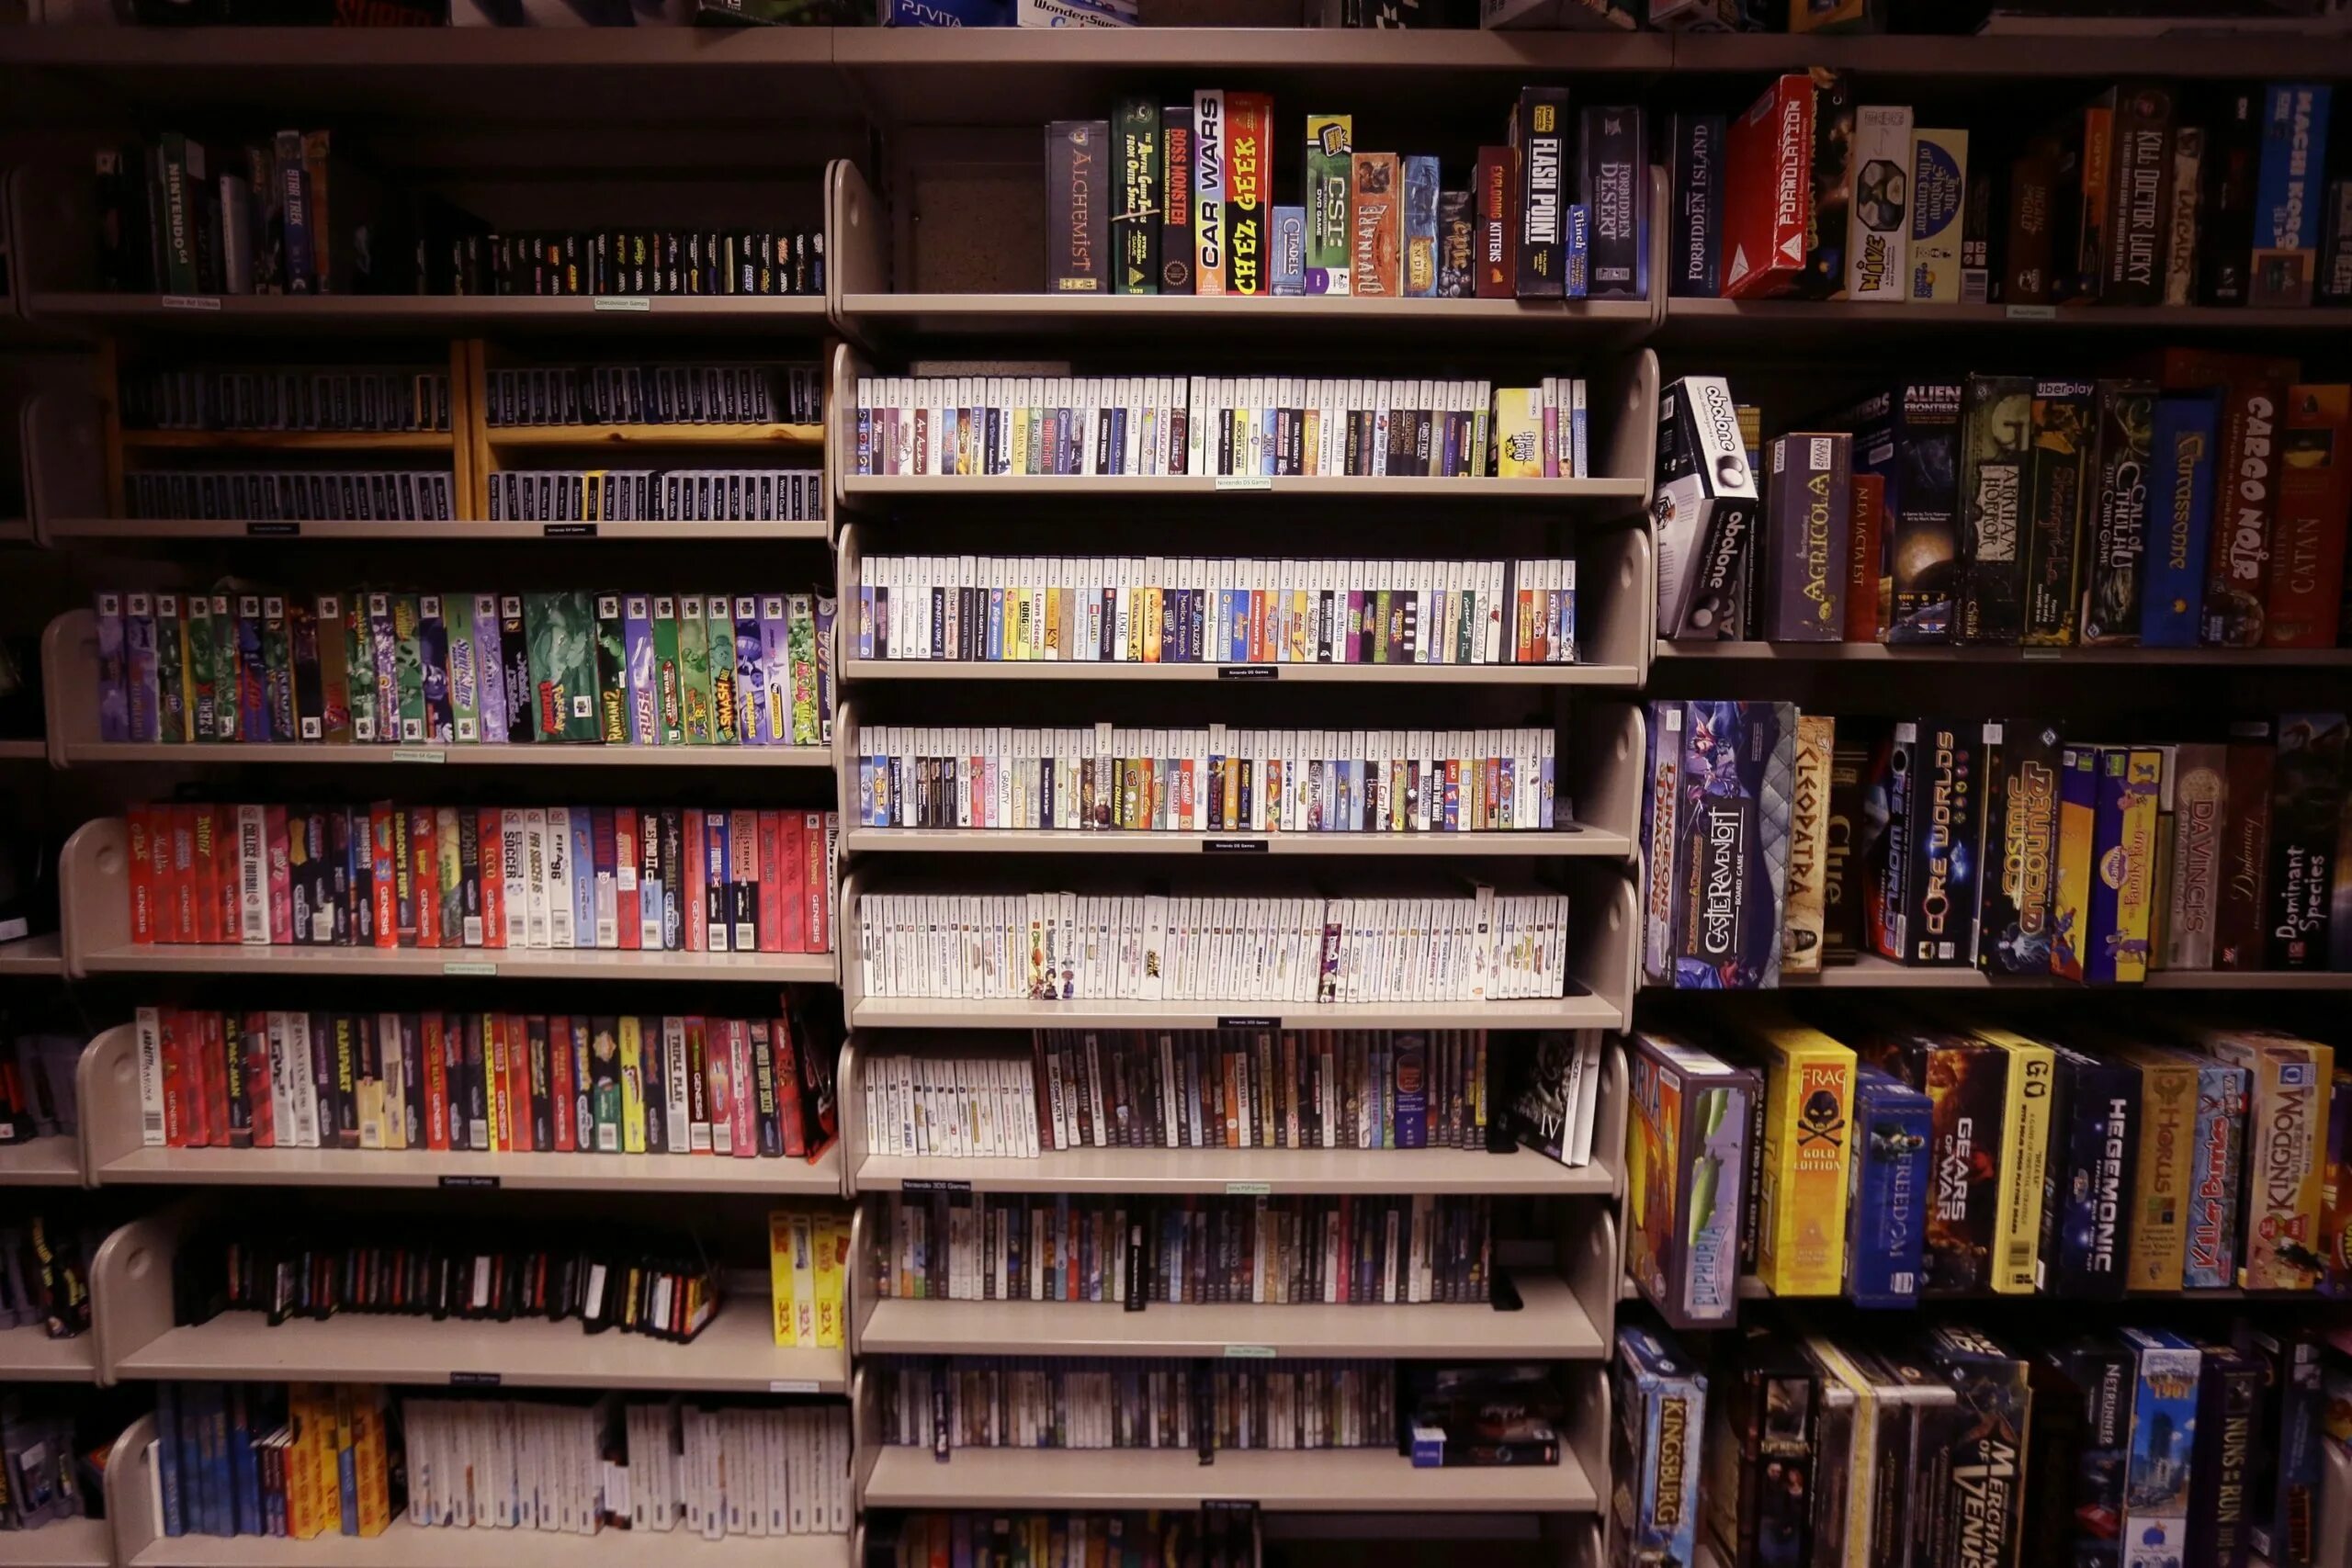 Archive gaming. Книги про компьютерные игры. Game Archive. Movie collection on the Shelf. WMADI Archive.